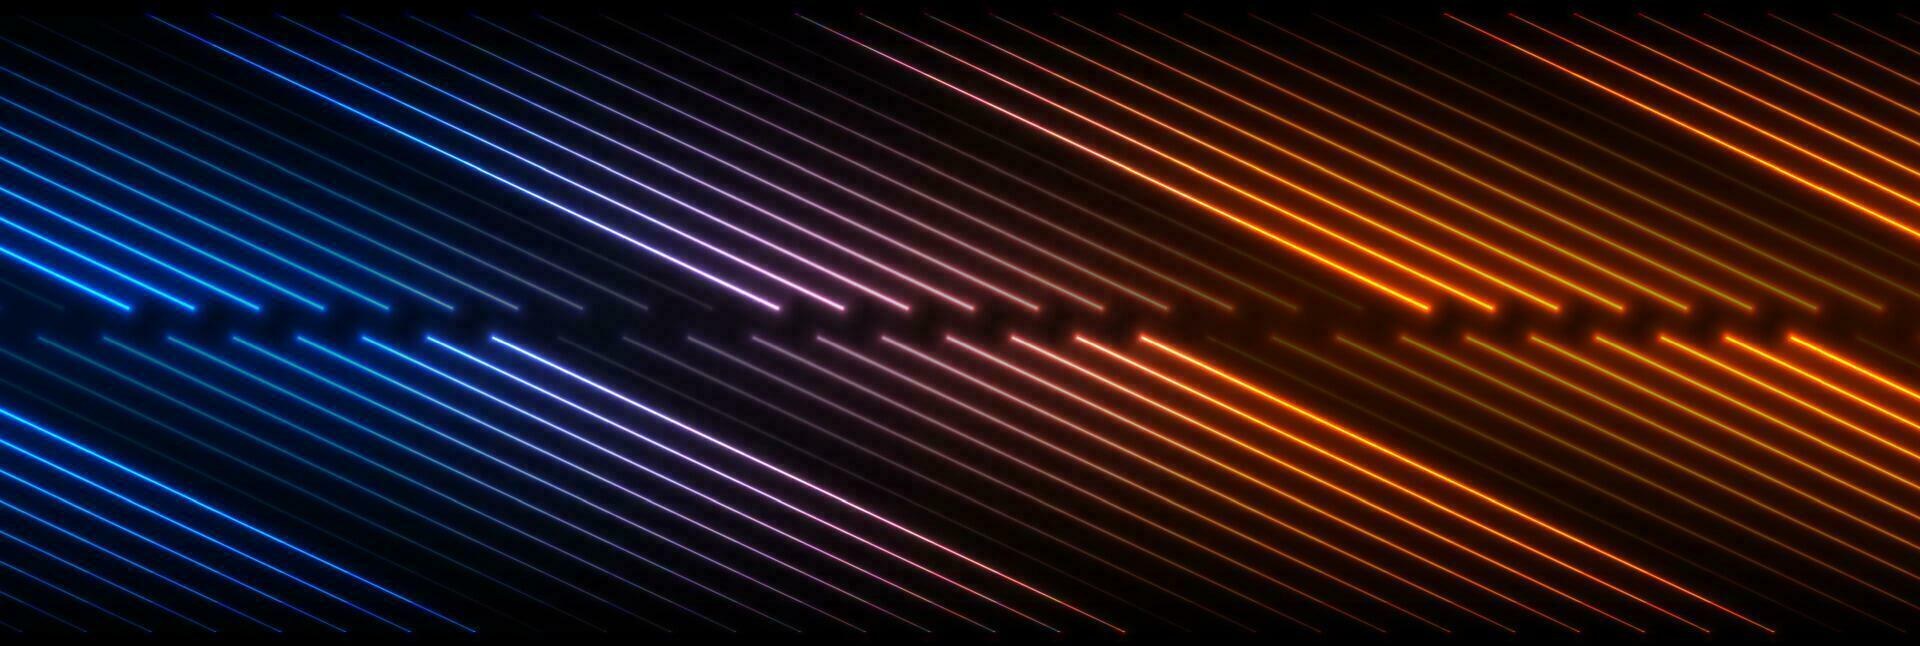 Blue and orange neon glowing laser lines futuristic background vector